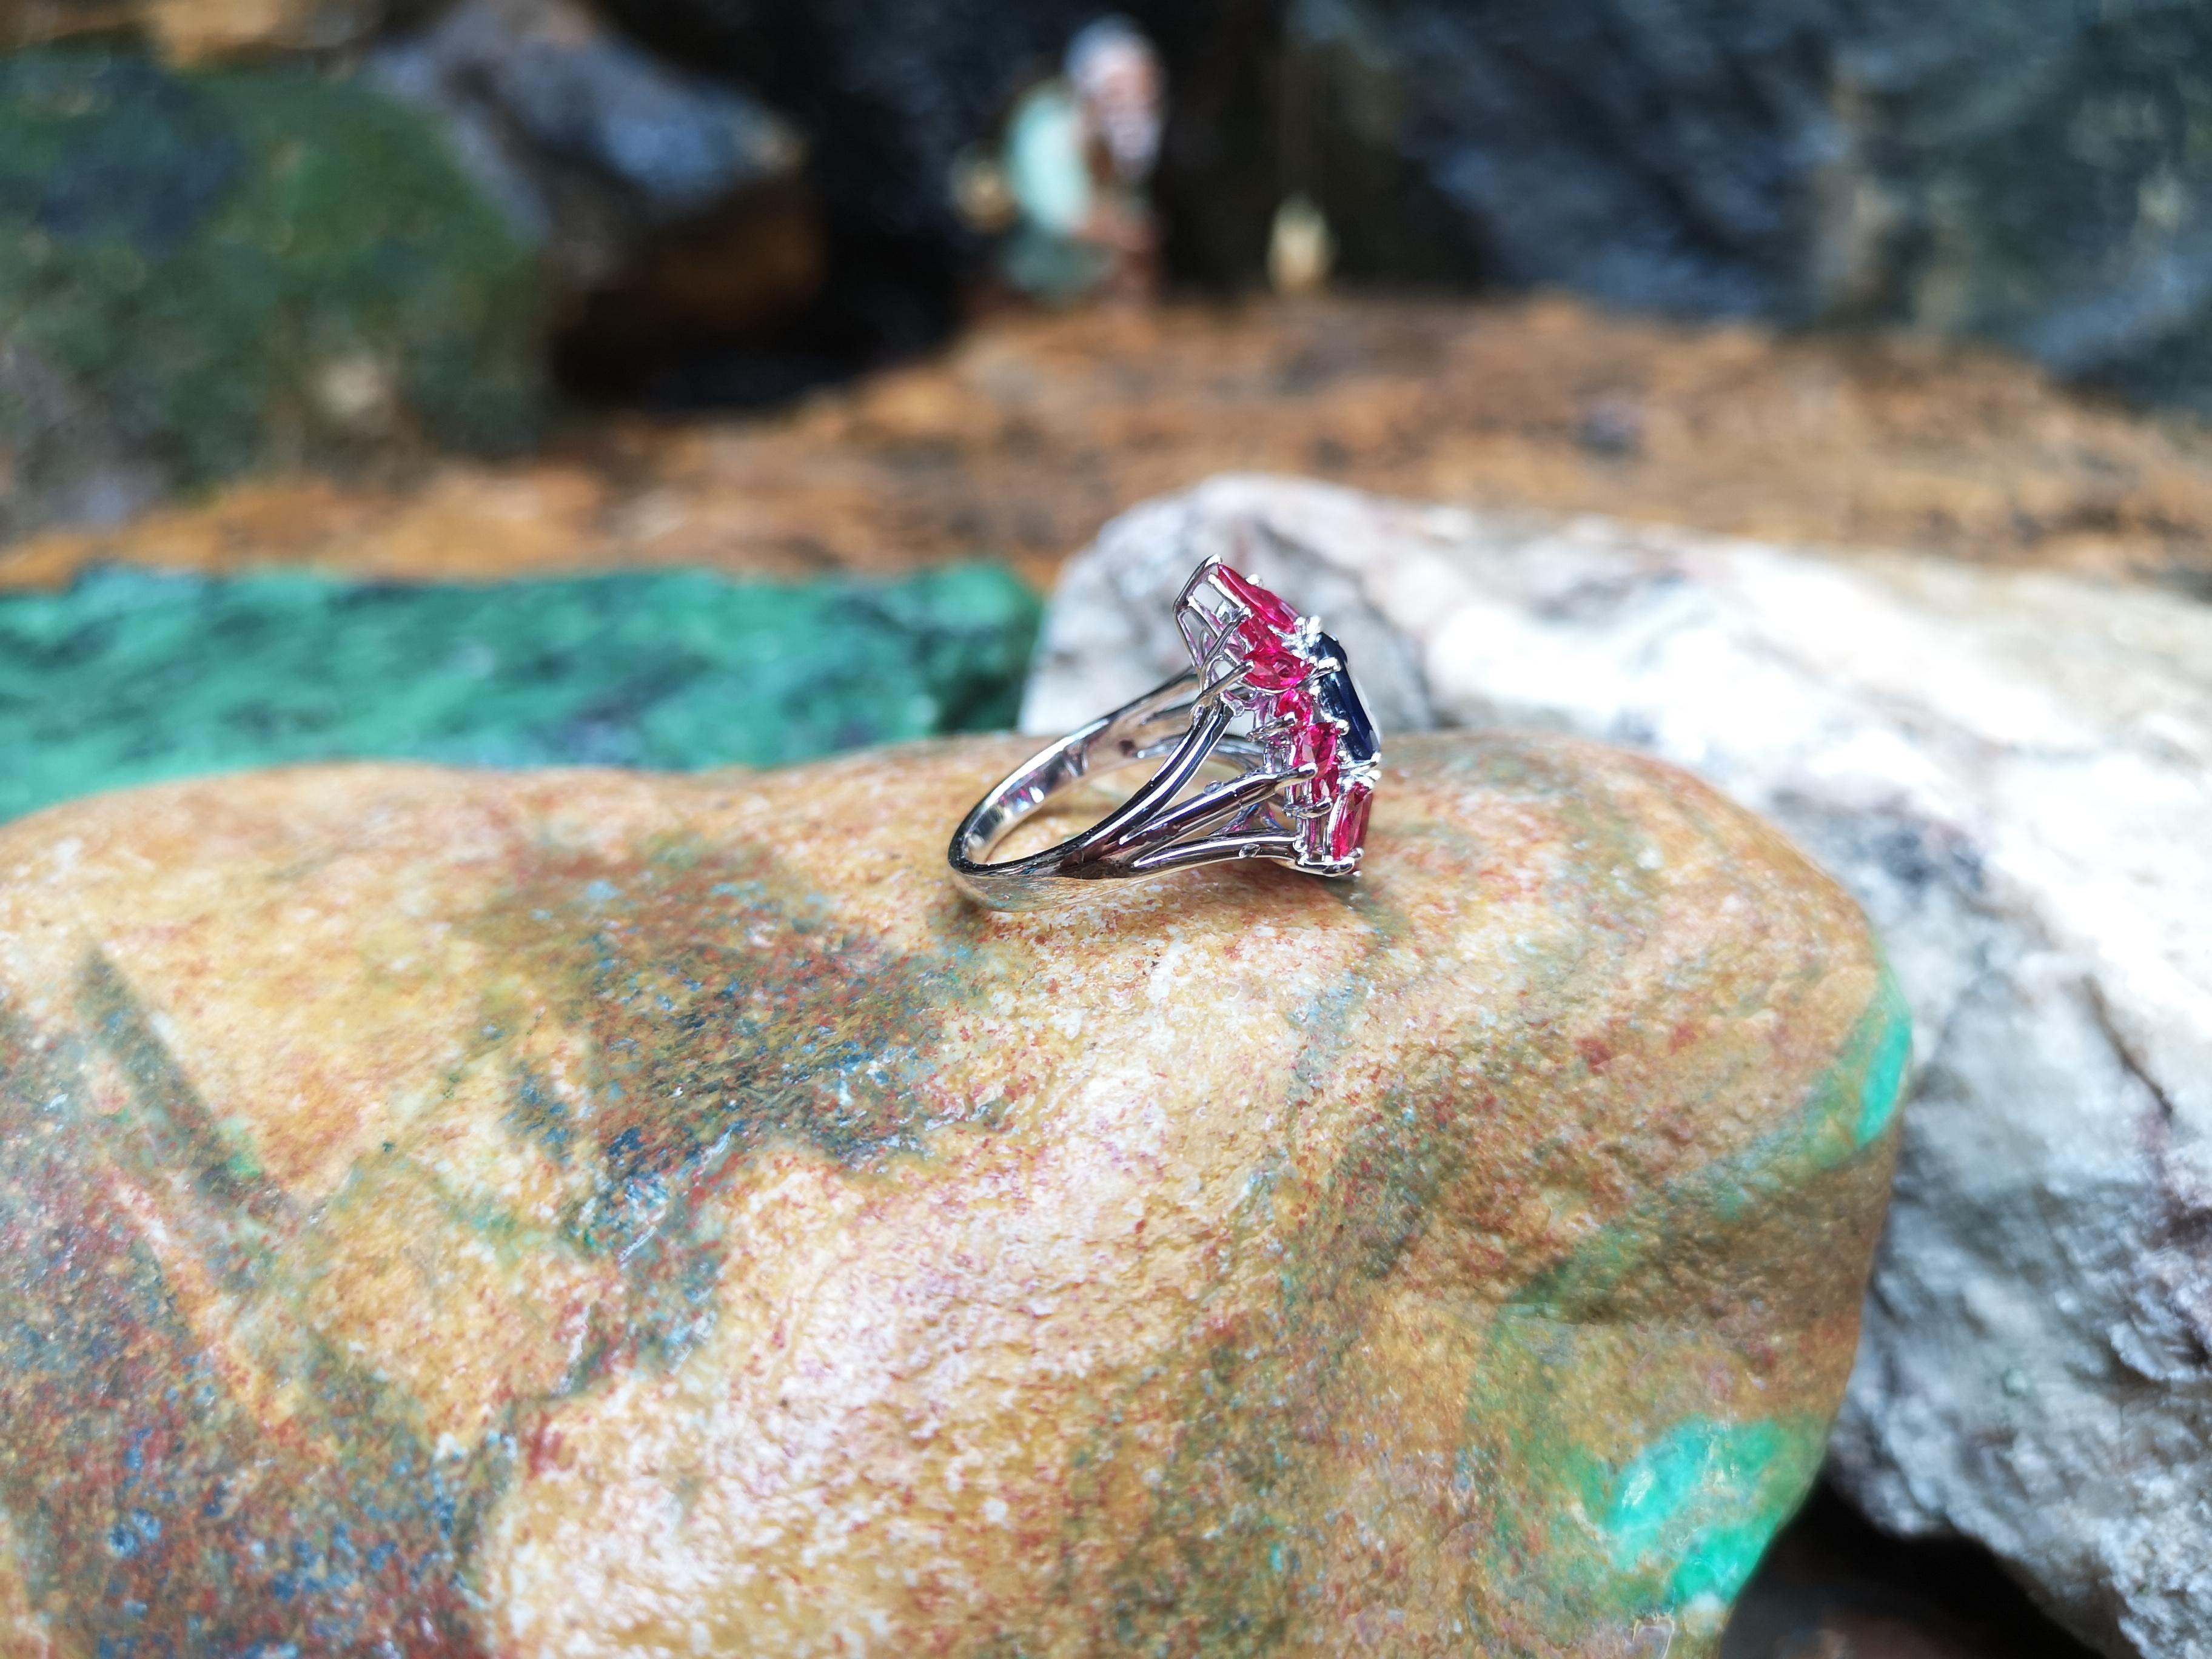 ruby and blue sapphire ring